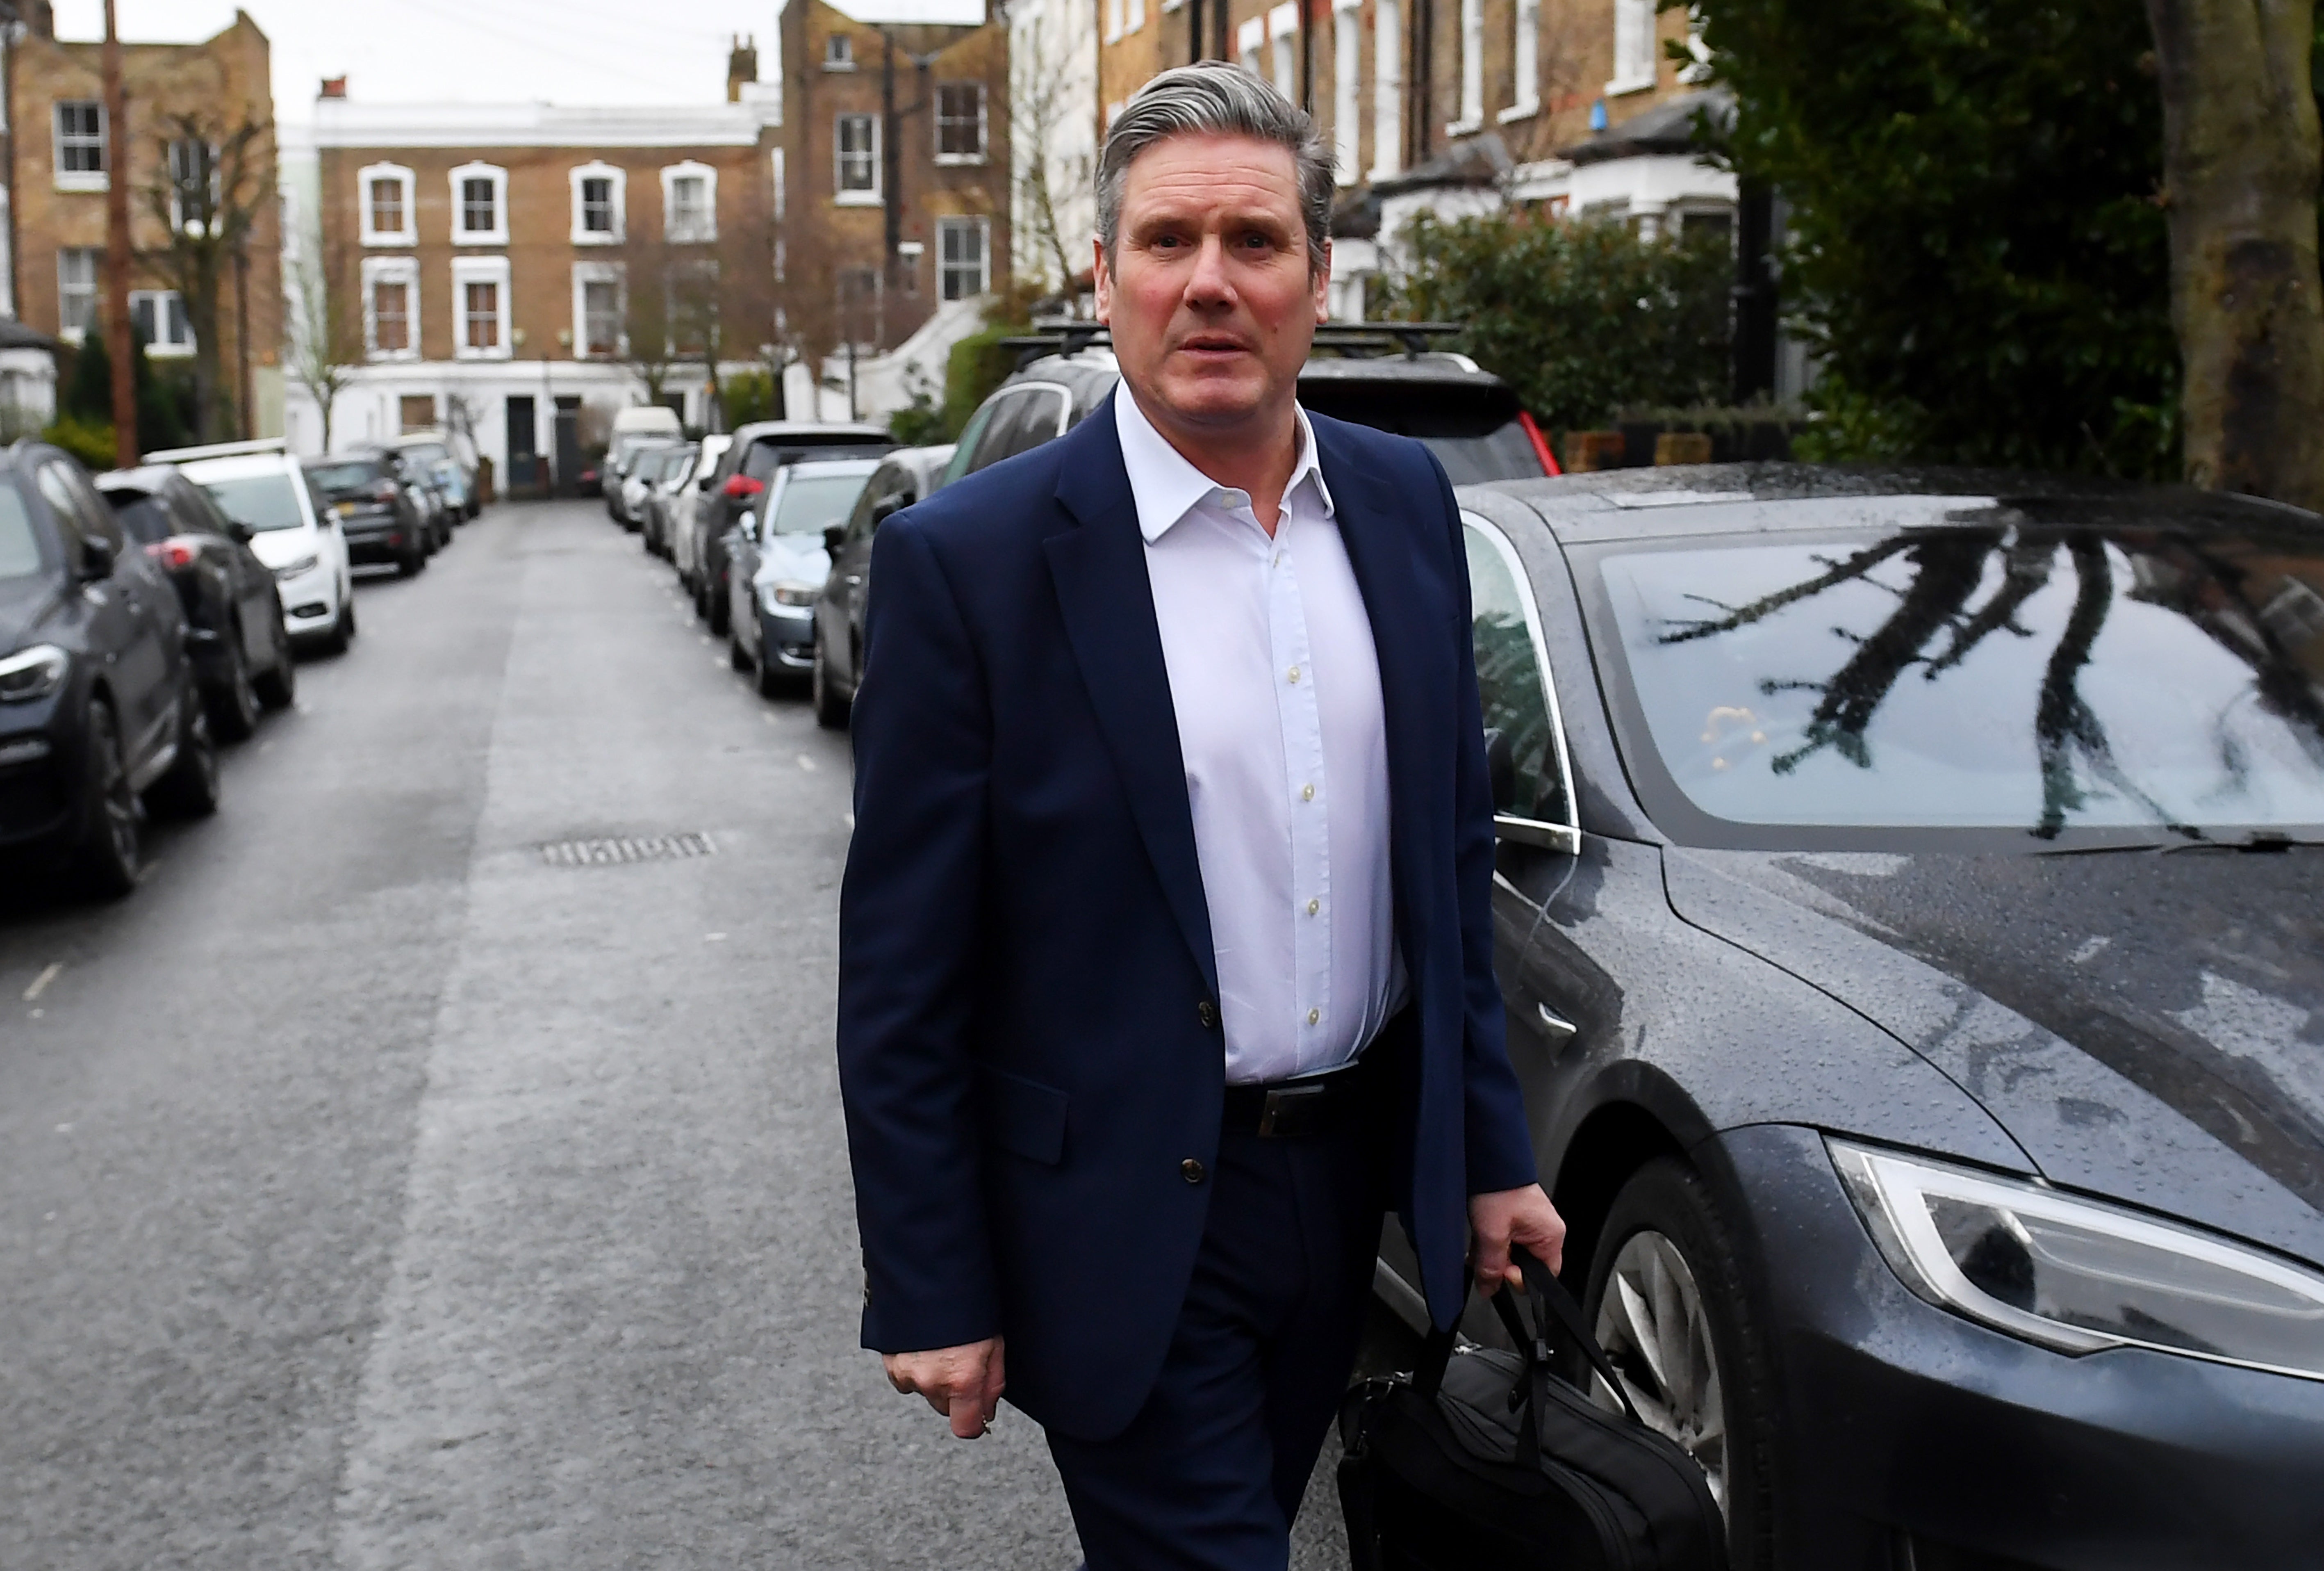 Keir Starmer sets off to make his big speech on the economy